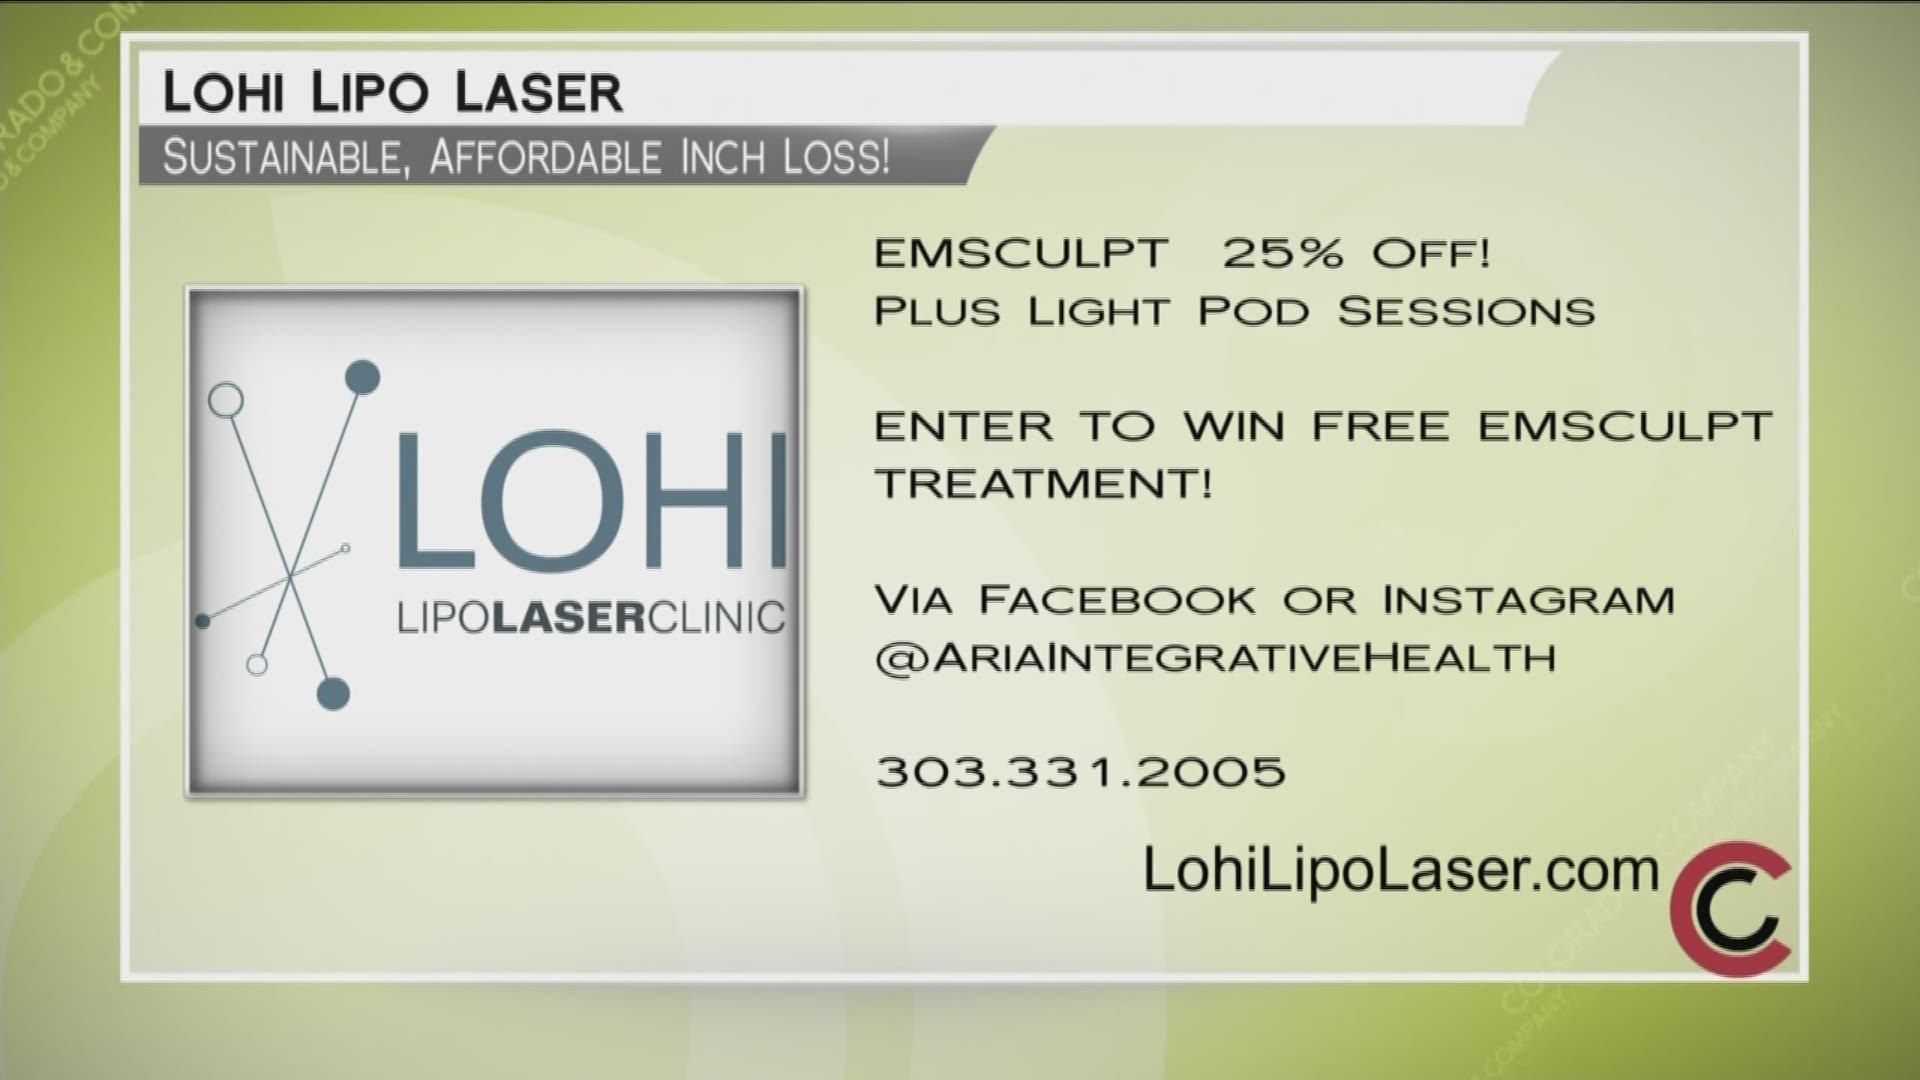 The newest body contouring tech is at Lohi Lipo Laser. Em-Sculpt is here and you can get it for 25% off at Lohi. You’ll also get a free light pod session per treatment and high-level nutritional counseling. Other special include Sculpsure at 20% off! This includes a free consultation, high level nutritional counseling, and two light pod sessions. Call them today—303.331.2005. Learn more online at www.LohiLipoLaser.com. 
THIS INTERVIEW HAS COMMERCIAL CONTENT. PRODUCTS AND SERVICES FEATURED APPEAR AS PAID ADVERTISING.